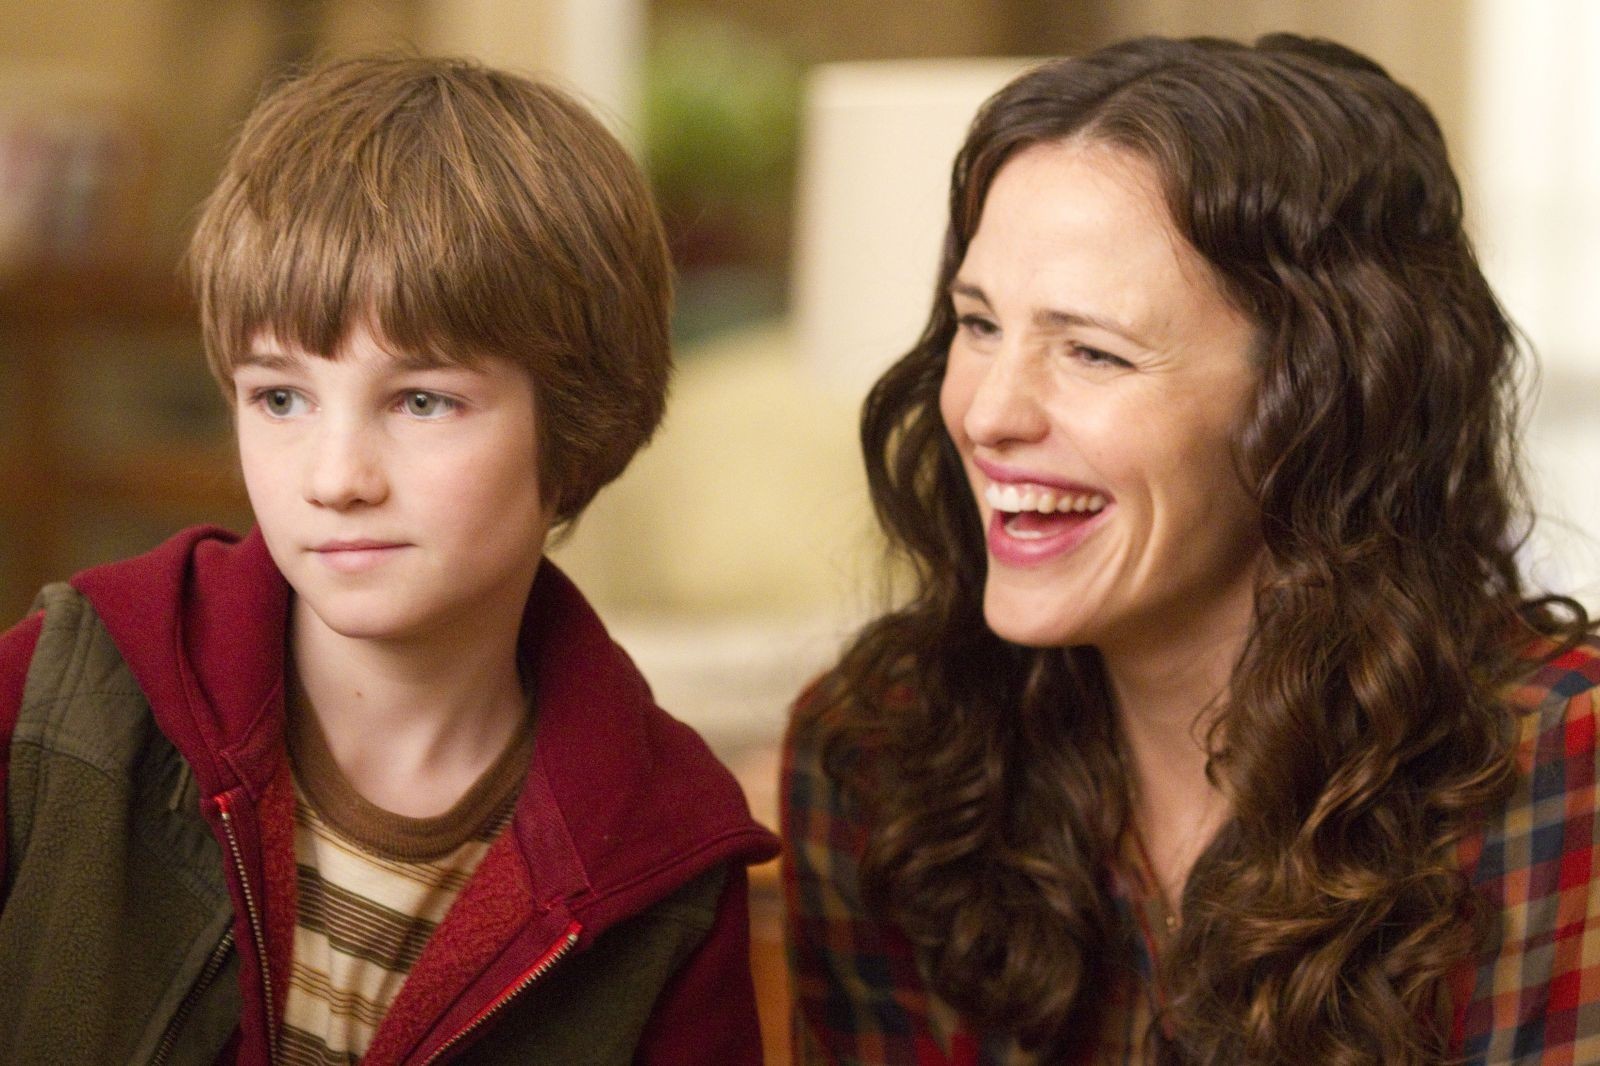 CJ Adams stars as Timothy Green and Jennifer Garner stars as Cindy Green in Walt Disney Pictures' The Odd Life of Timothy Green (2012)